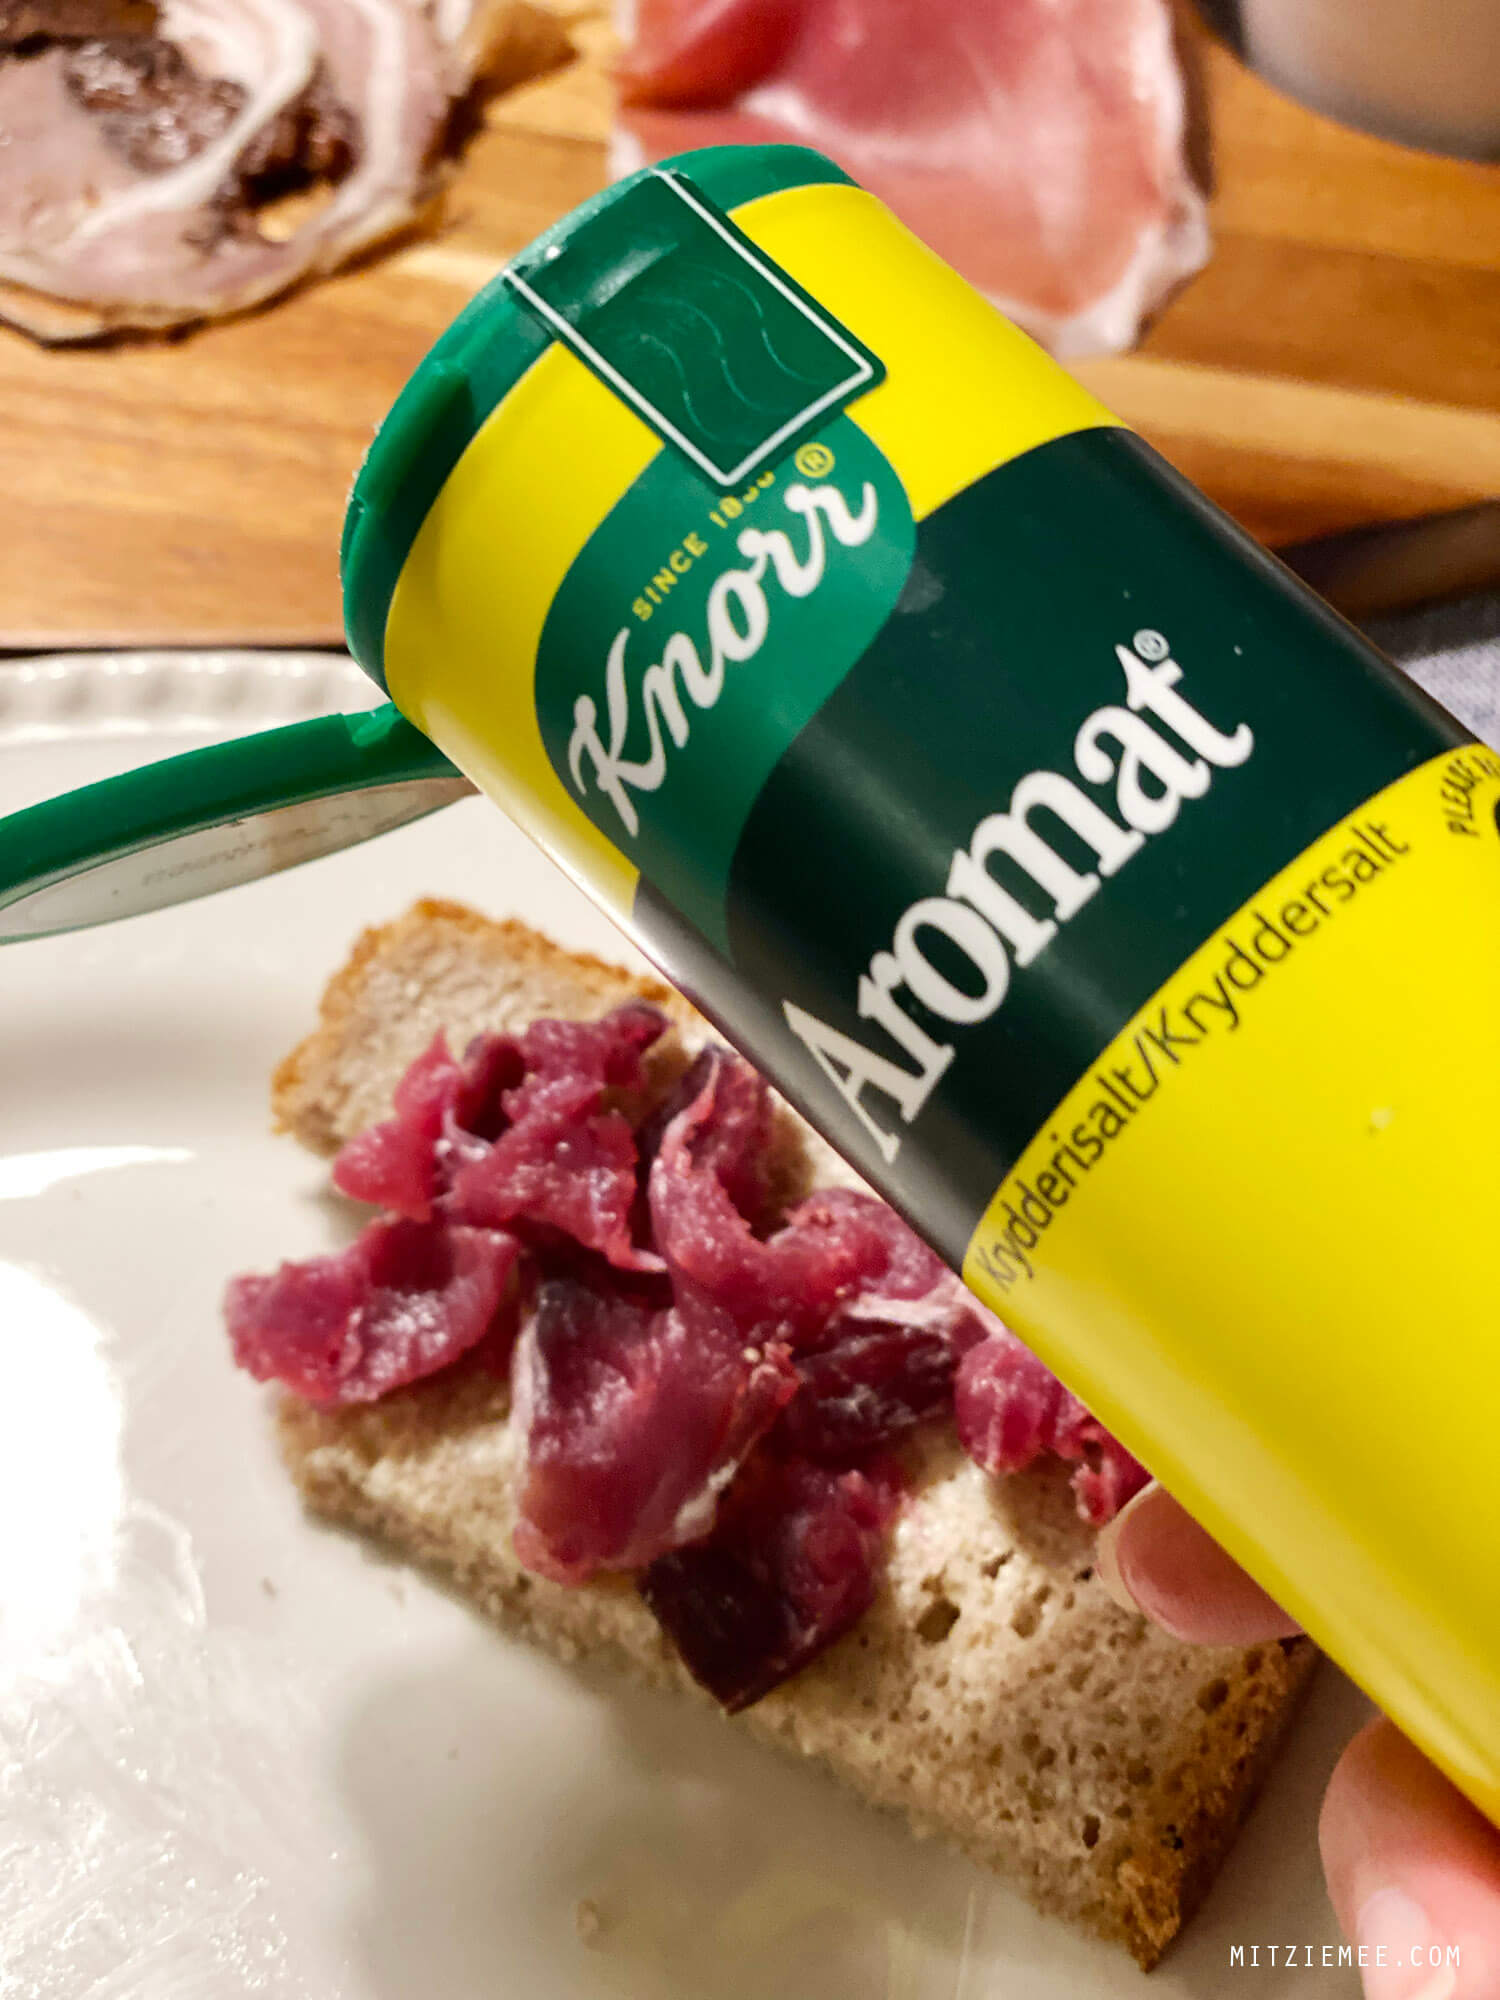 Aromat, probably the most popular seasoning in the Faroe Islands